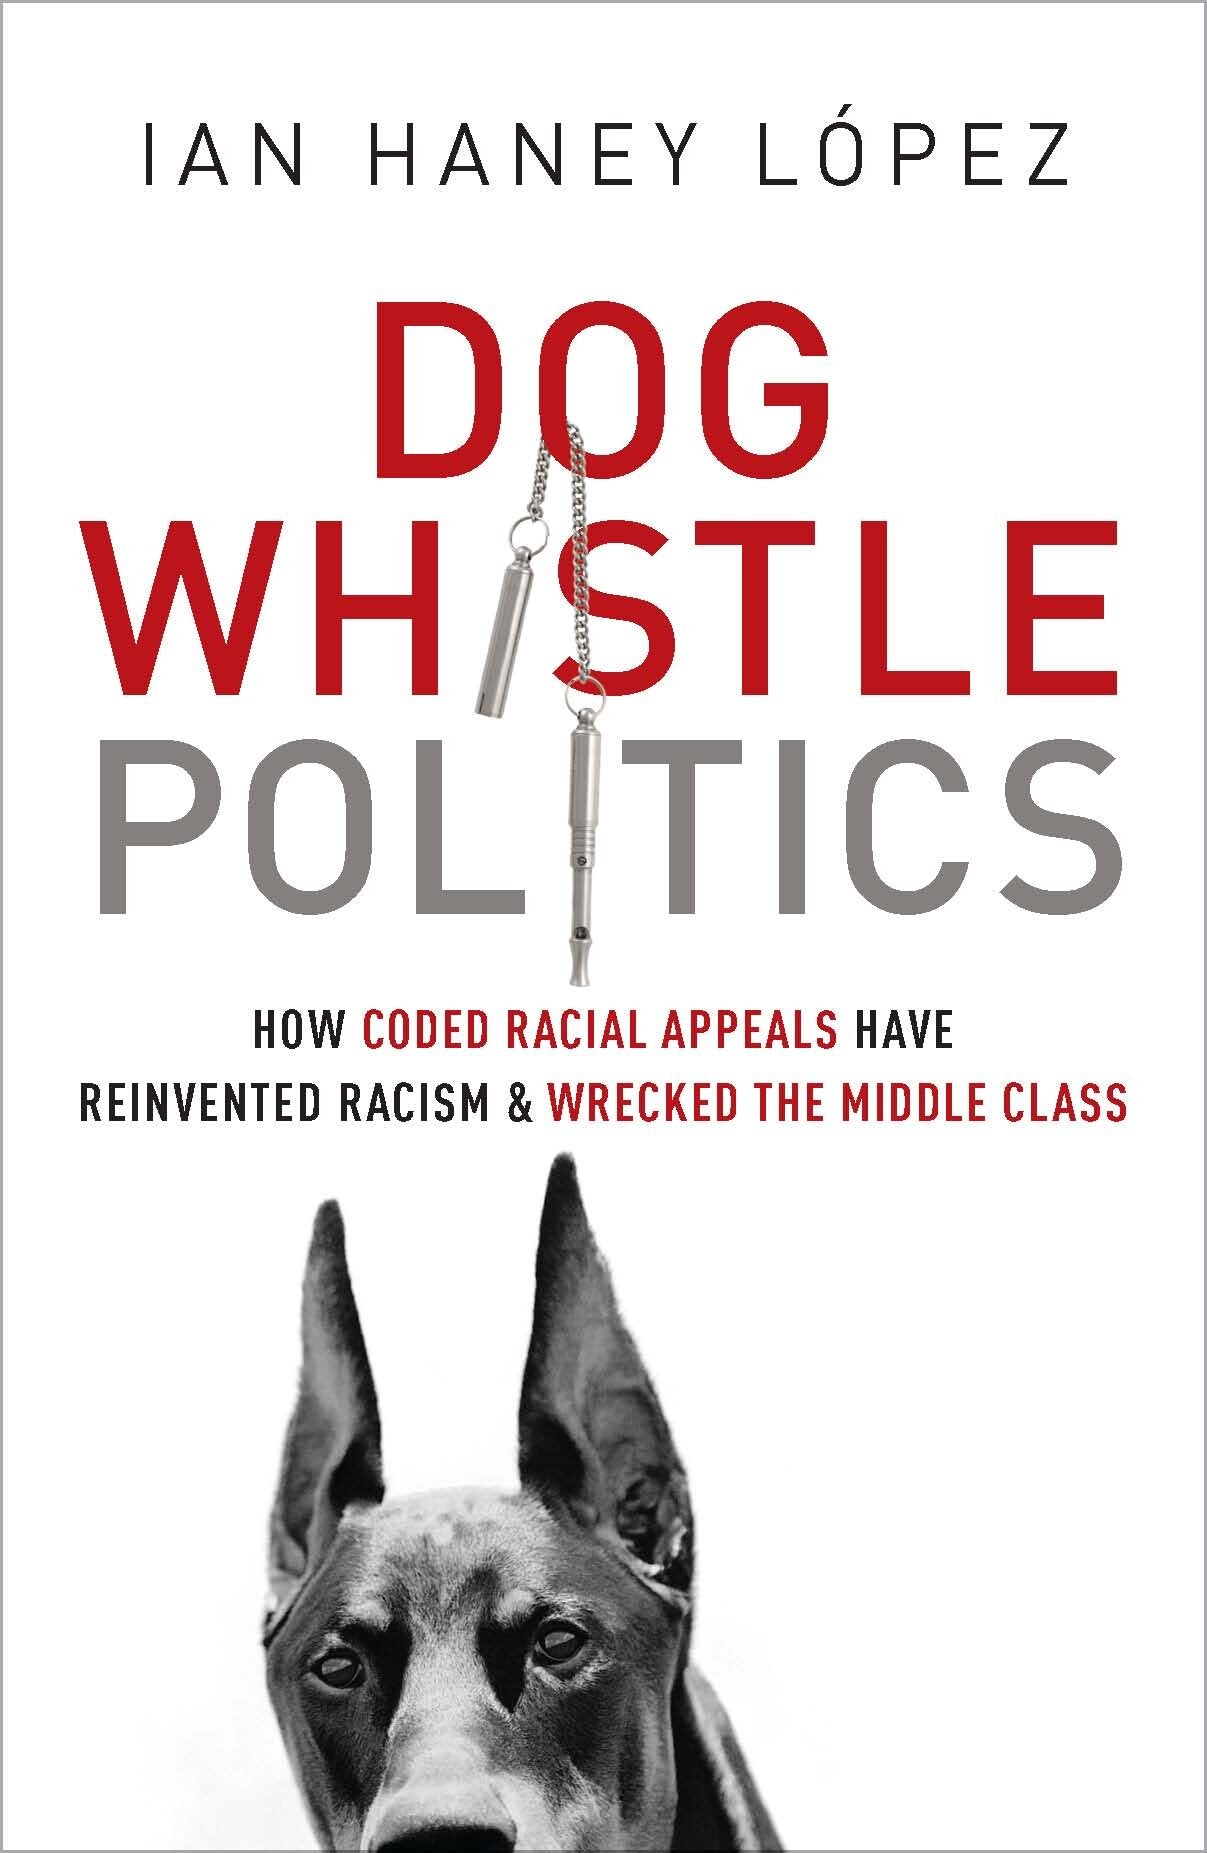 Dog Whistle Politics: How Coded Racial Appeals Have Reinvented Racism and Wrecked the Middle Class (Paperback)